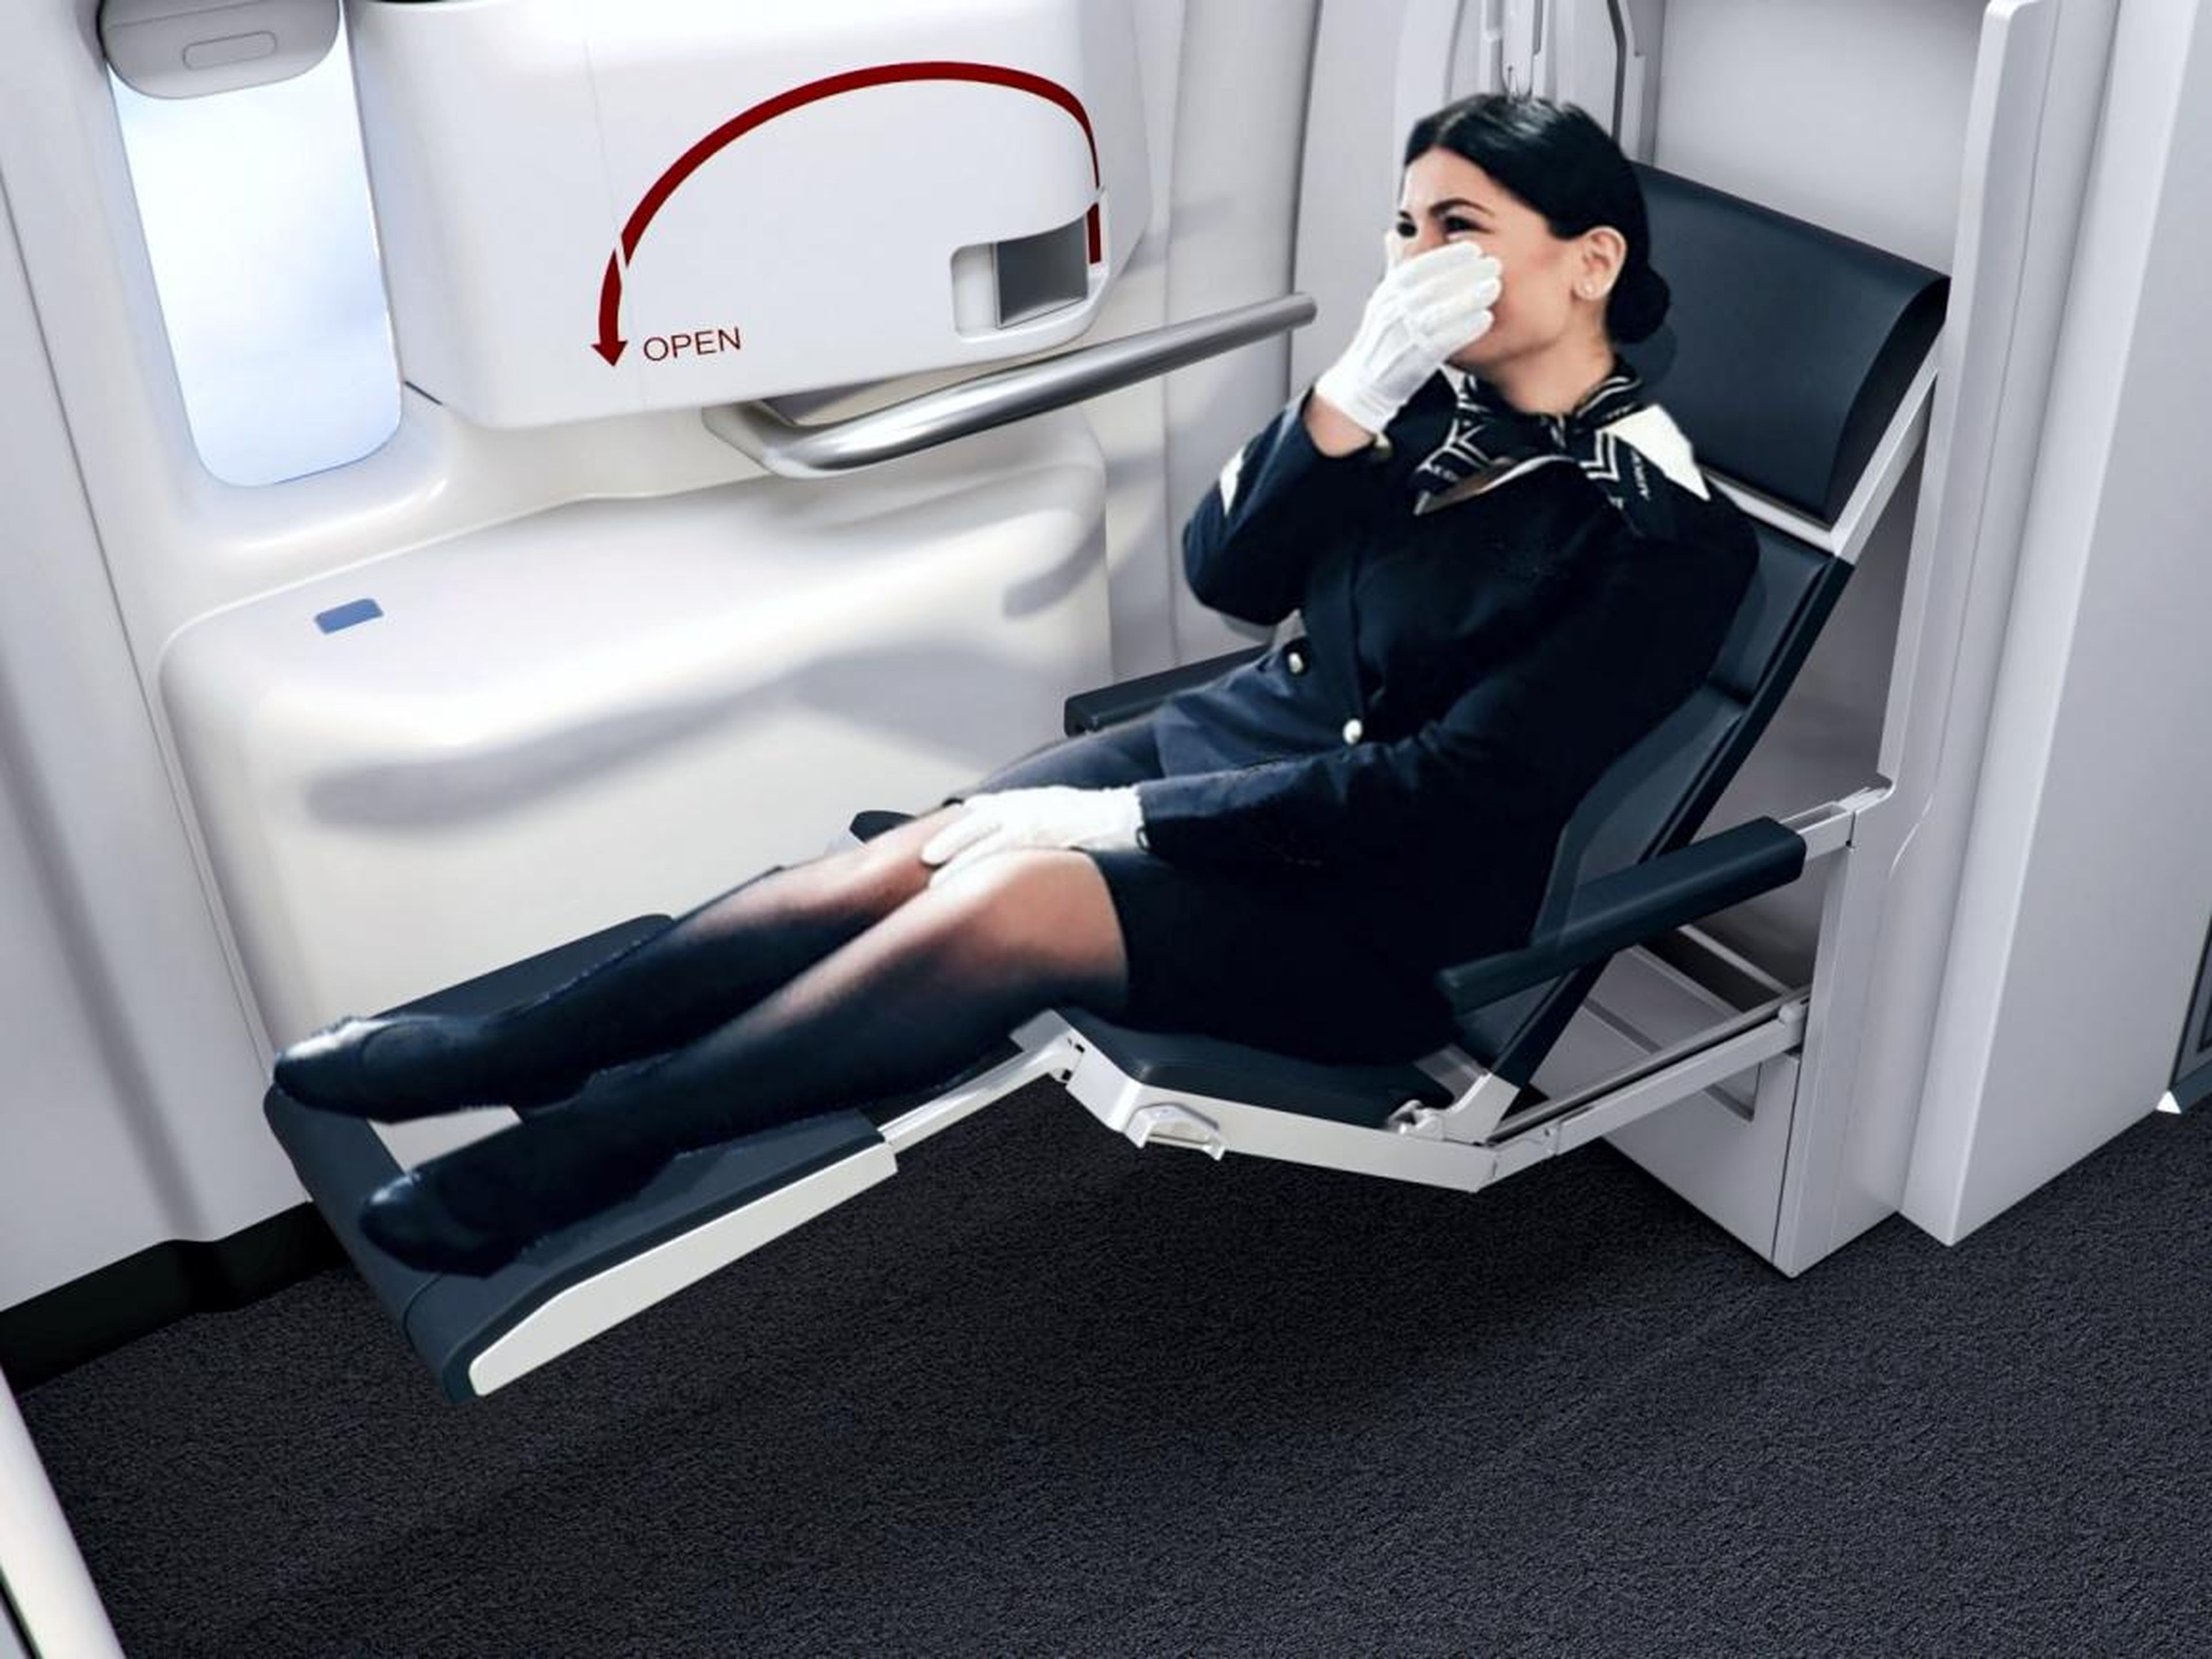 While normally overlooked in terms of in-flight comfort, flight crews can also get in on the trend.